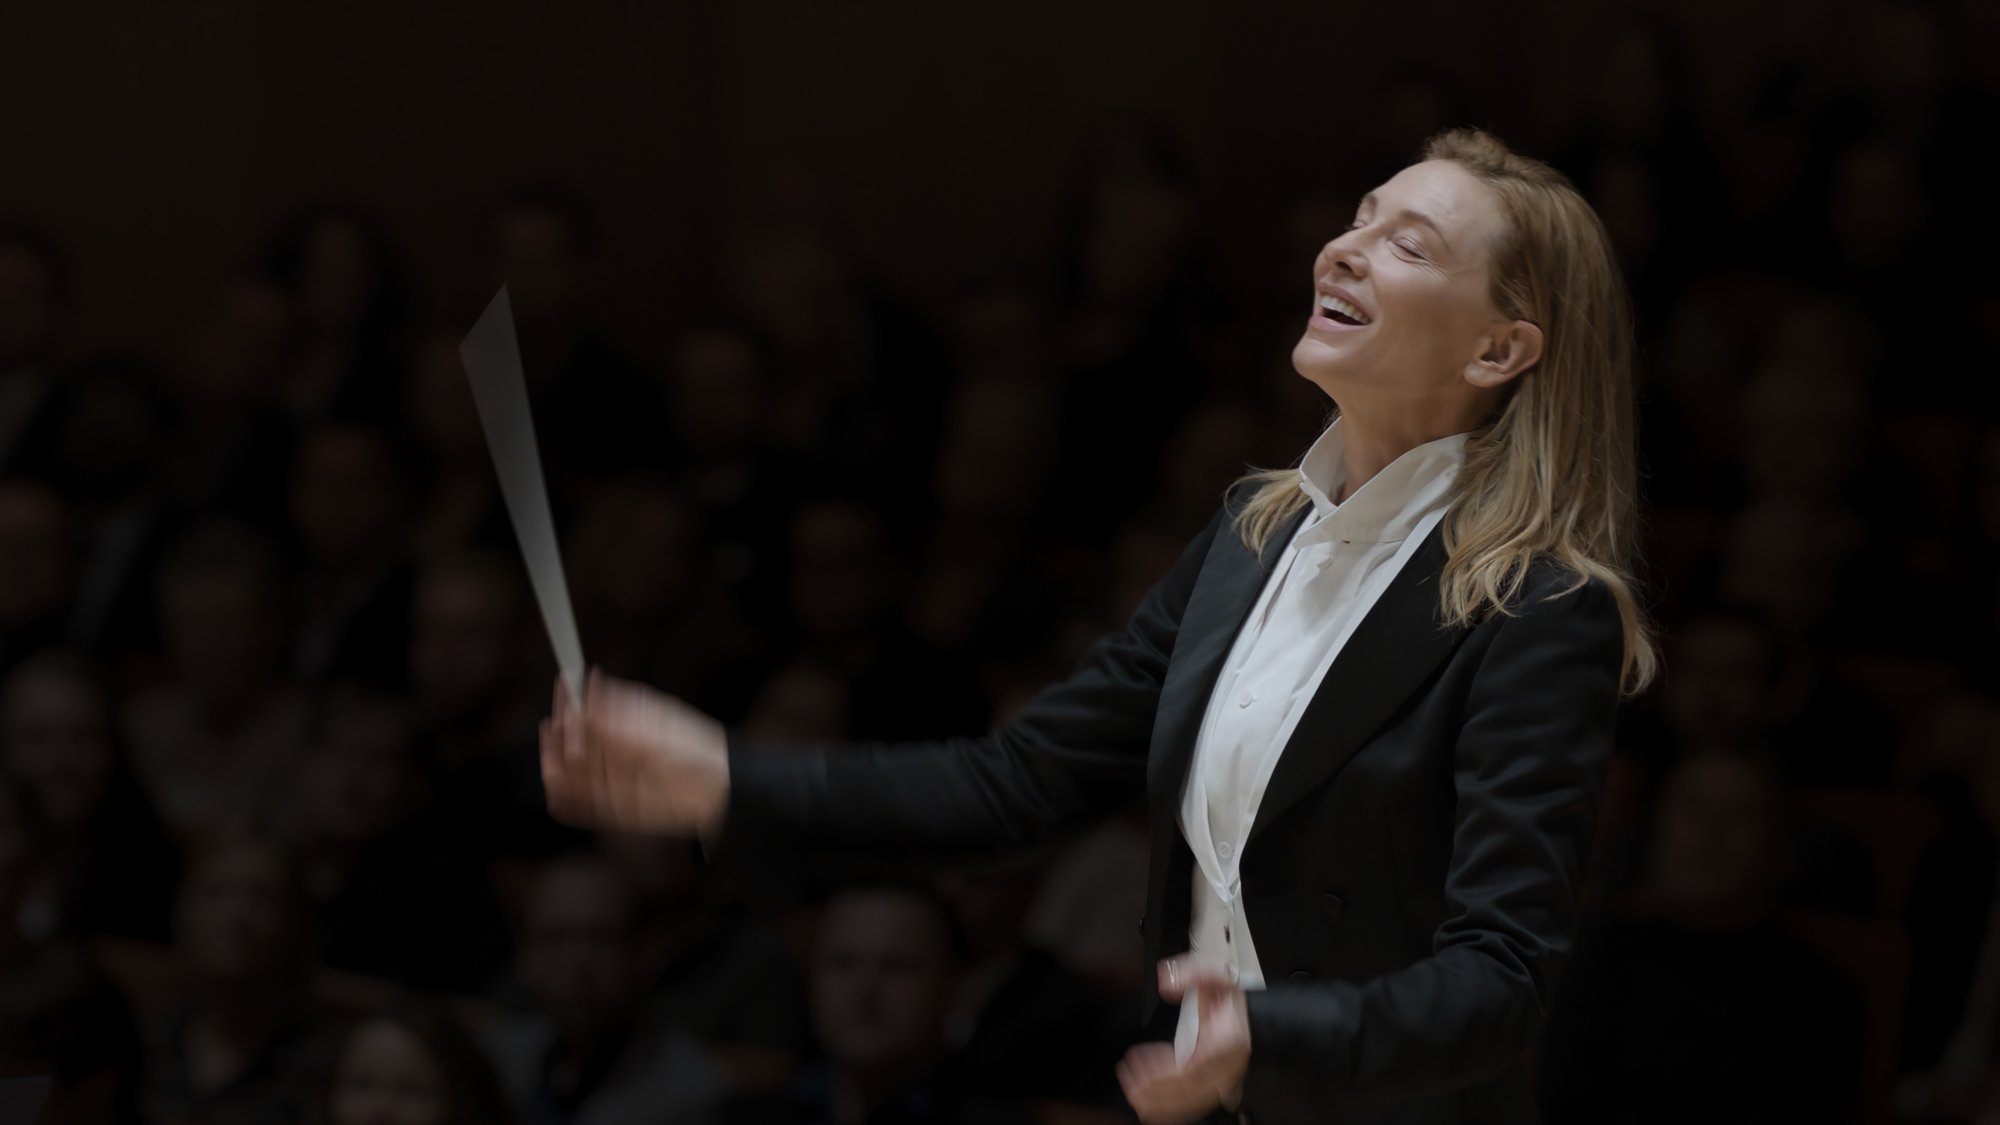 'TÁR' Cate Blanchett as Lydia Tár smiling and using her conductor stick